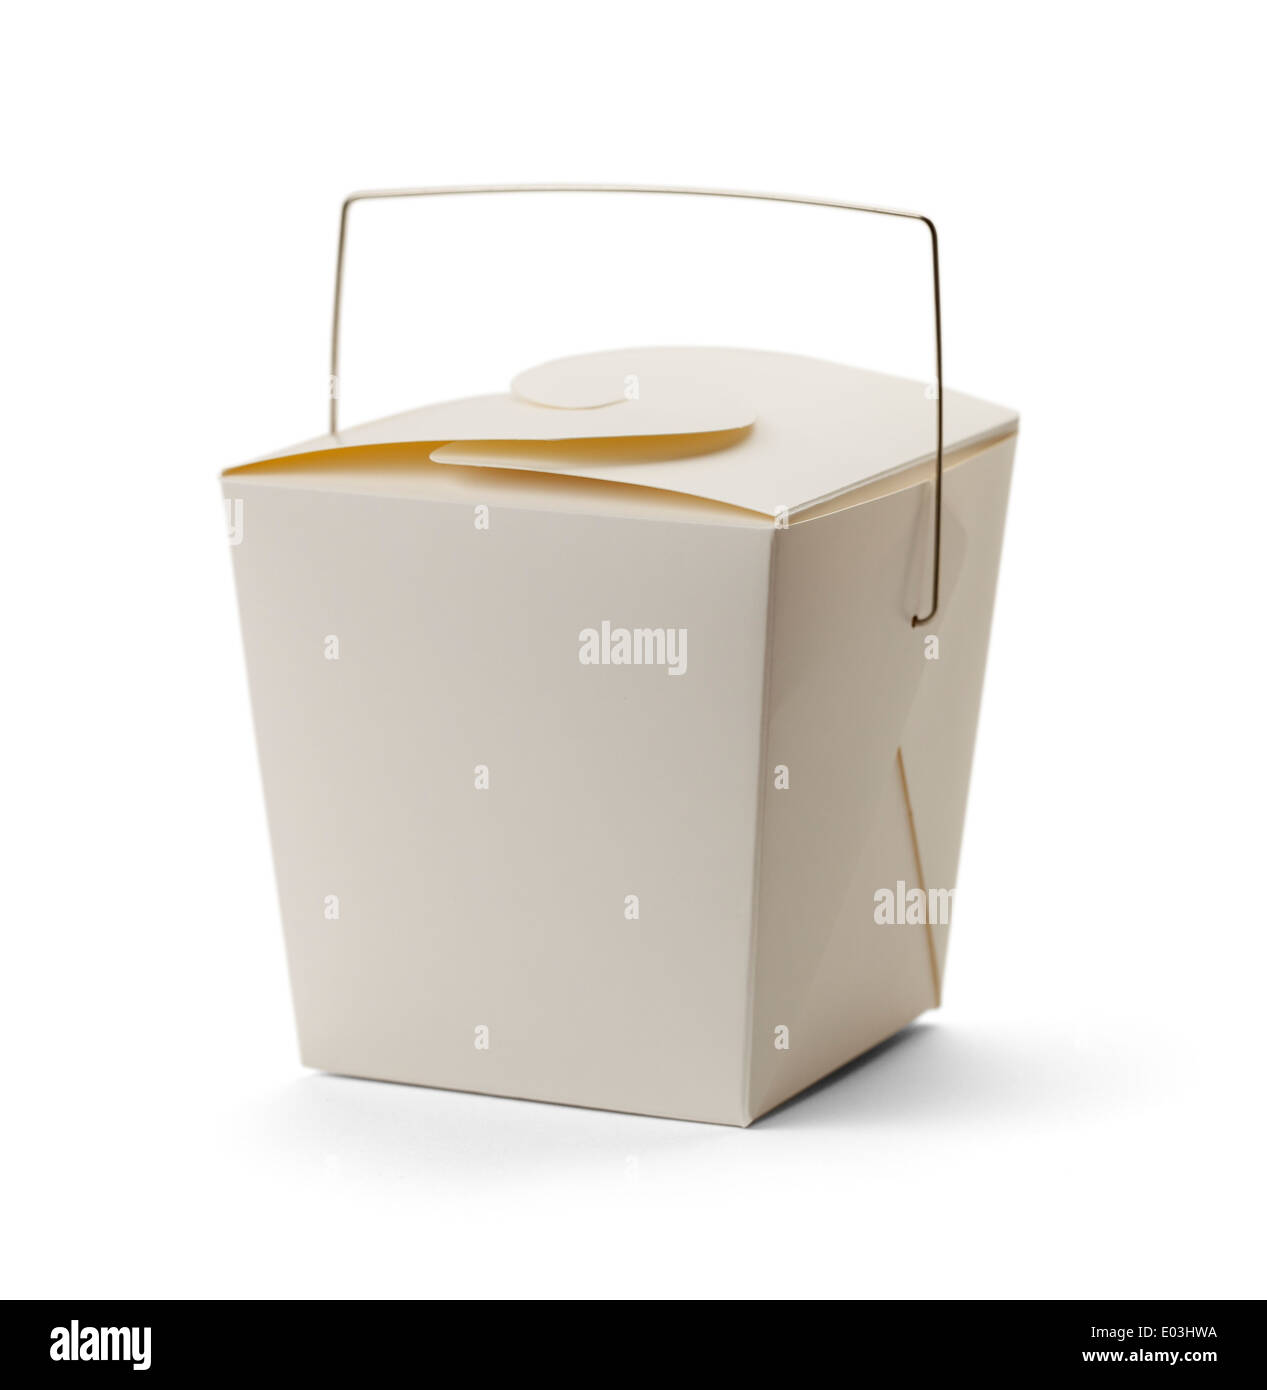 https://c8.alamy.com/comp/E03HWA/white-take-out-box-with-copy-space-isolated-on-white-background-E03HWA.jpg